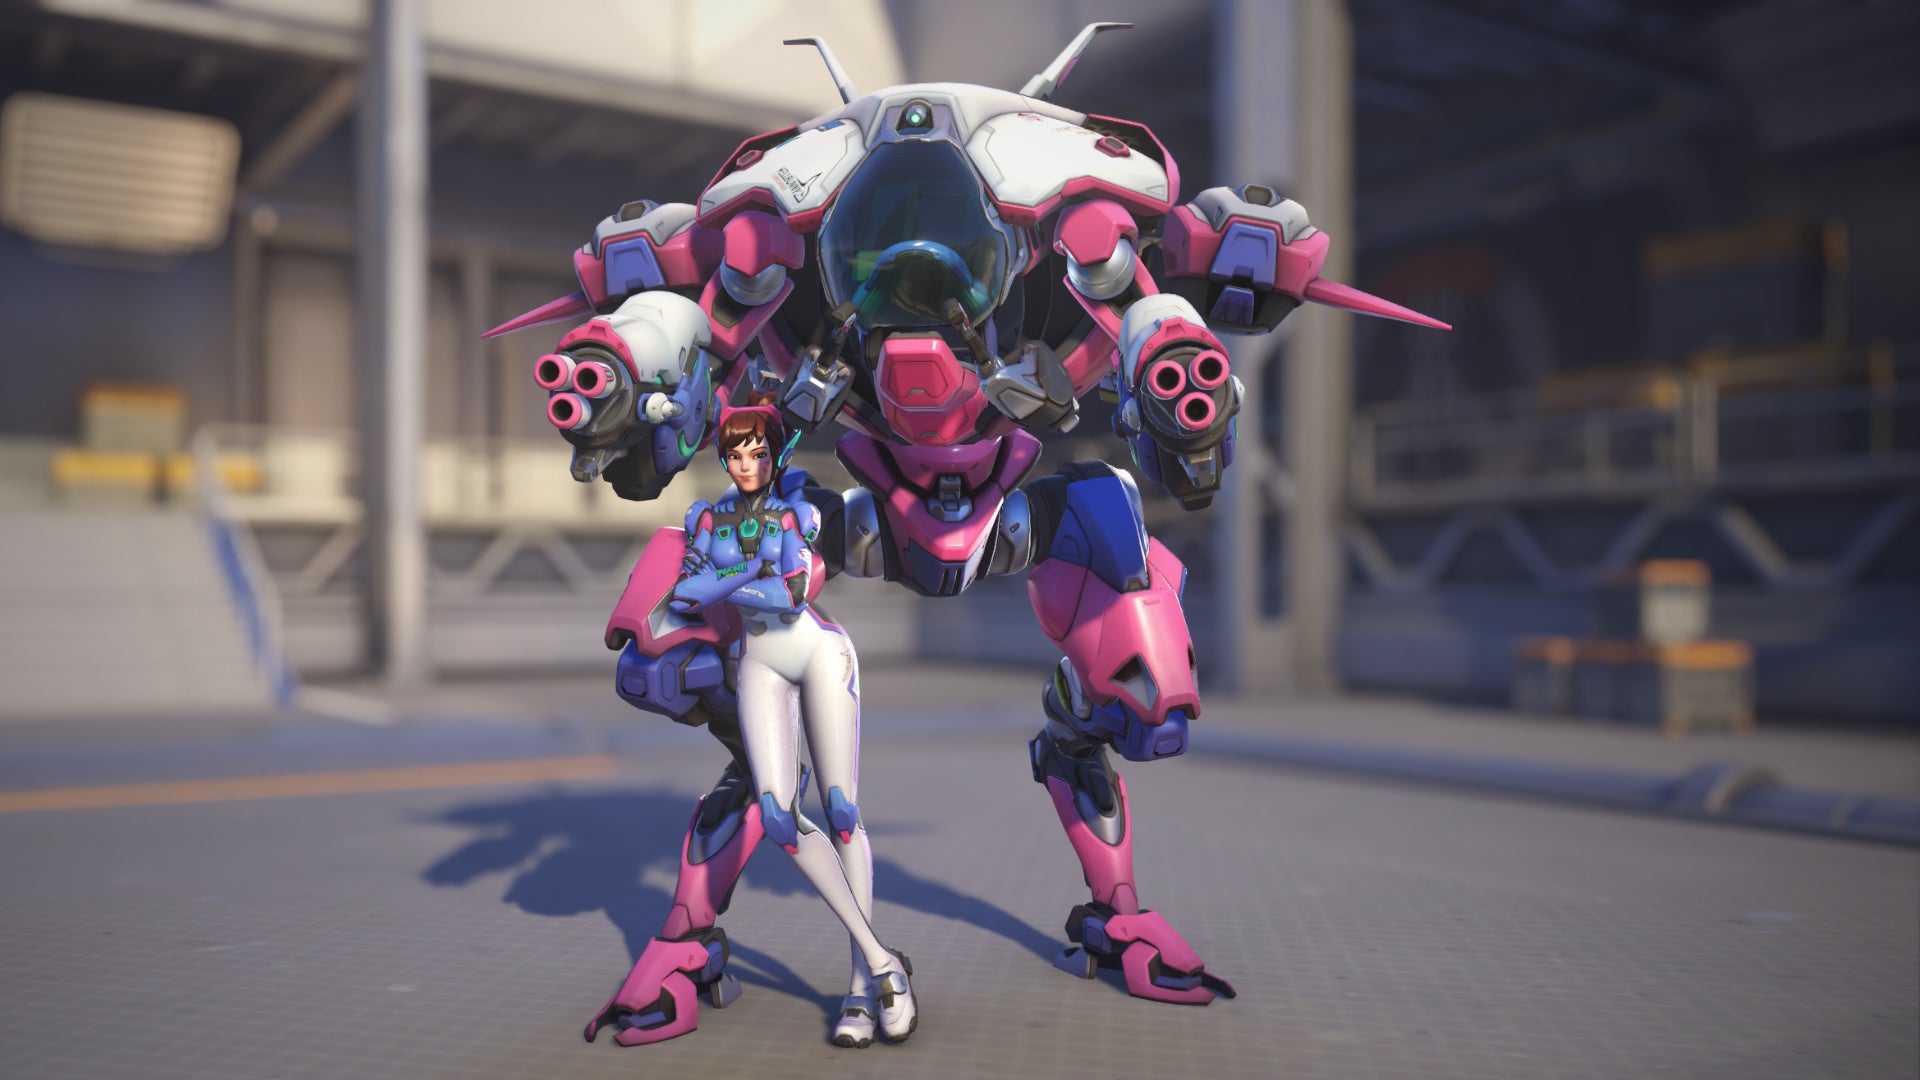 D.Va, a hero in Overwatch 2, poses before the camera in the hero selection screen.